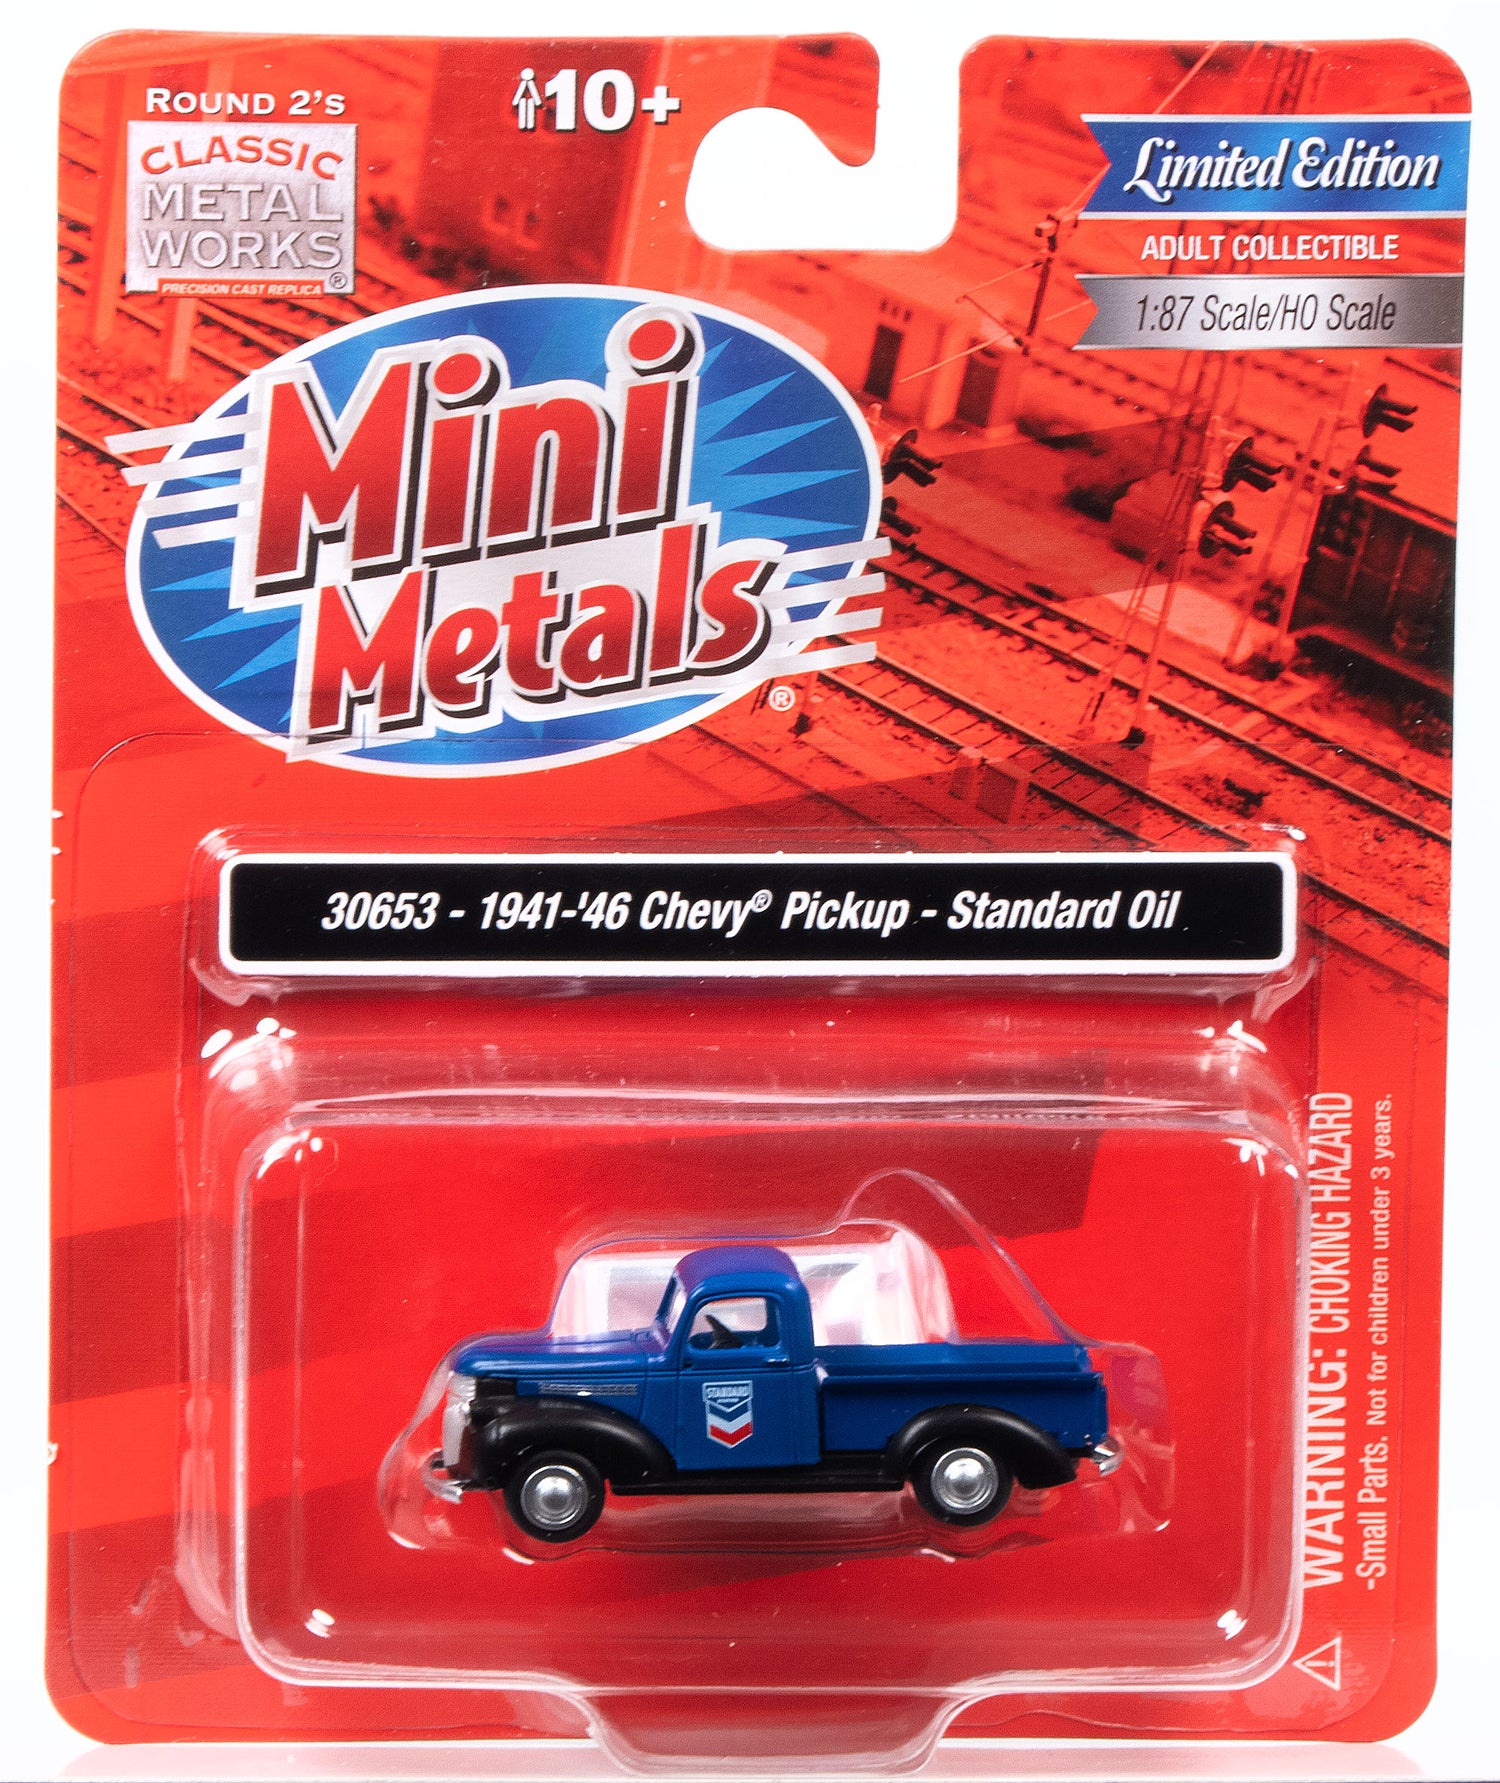 Classic Metal Works 1941-1946 Chevy Pickup (Standard Oil) 1:87 HO Scale